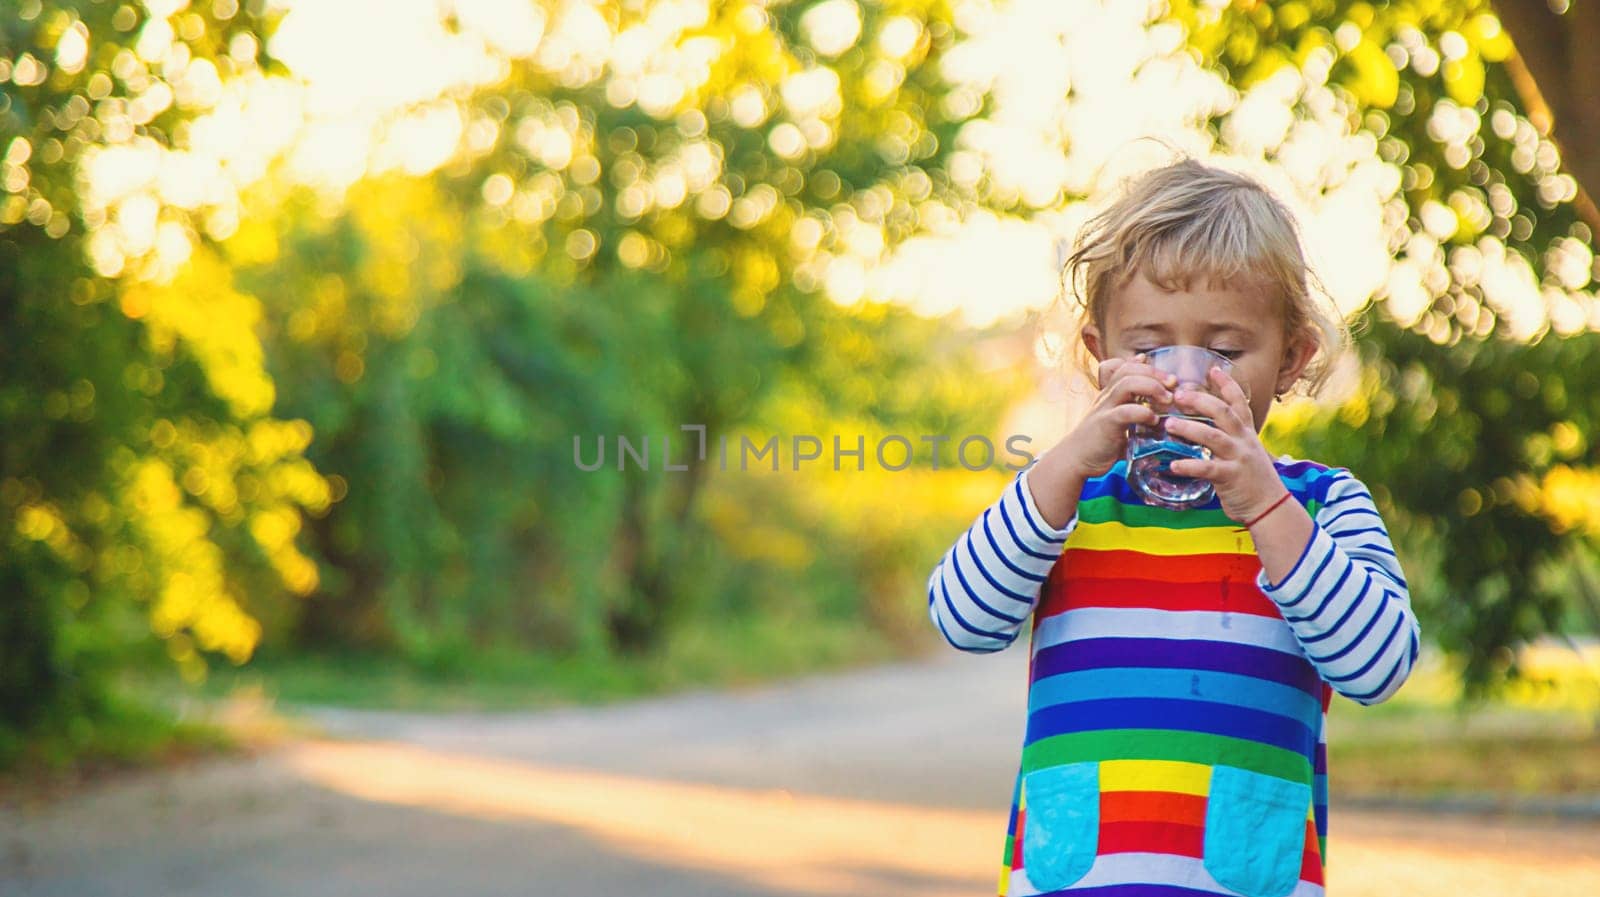 a child drinks water from a glass. Selective focus. Kid.